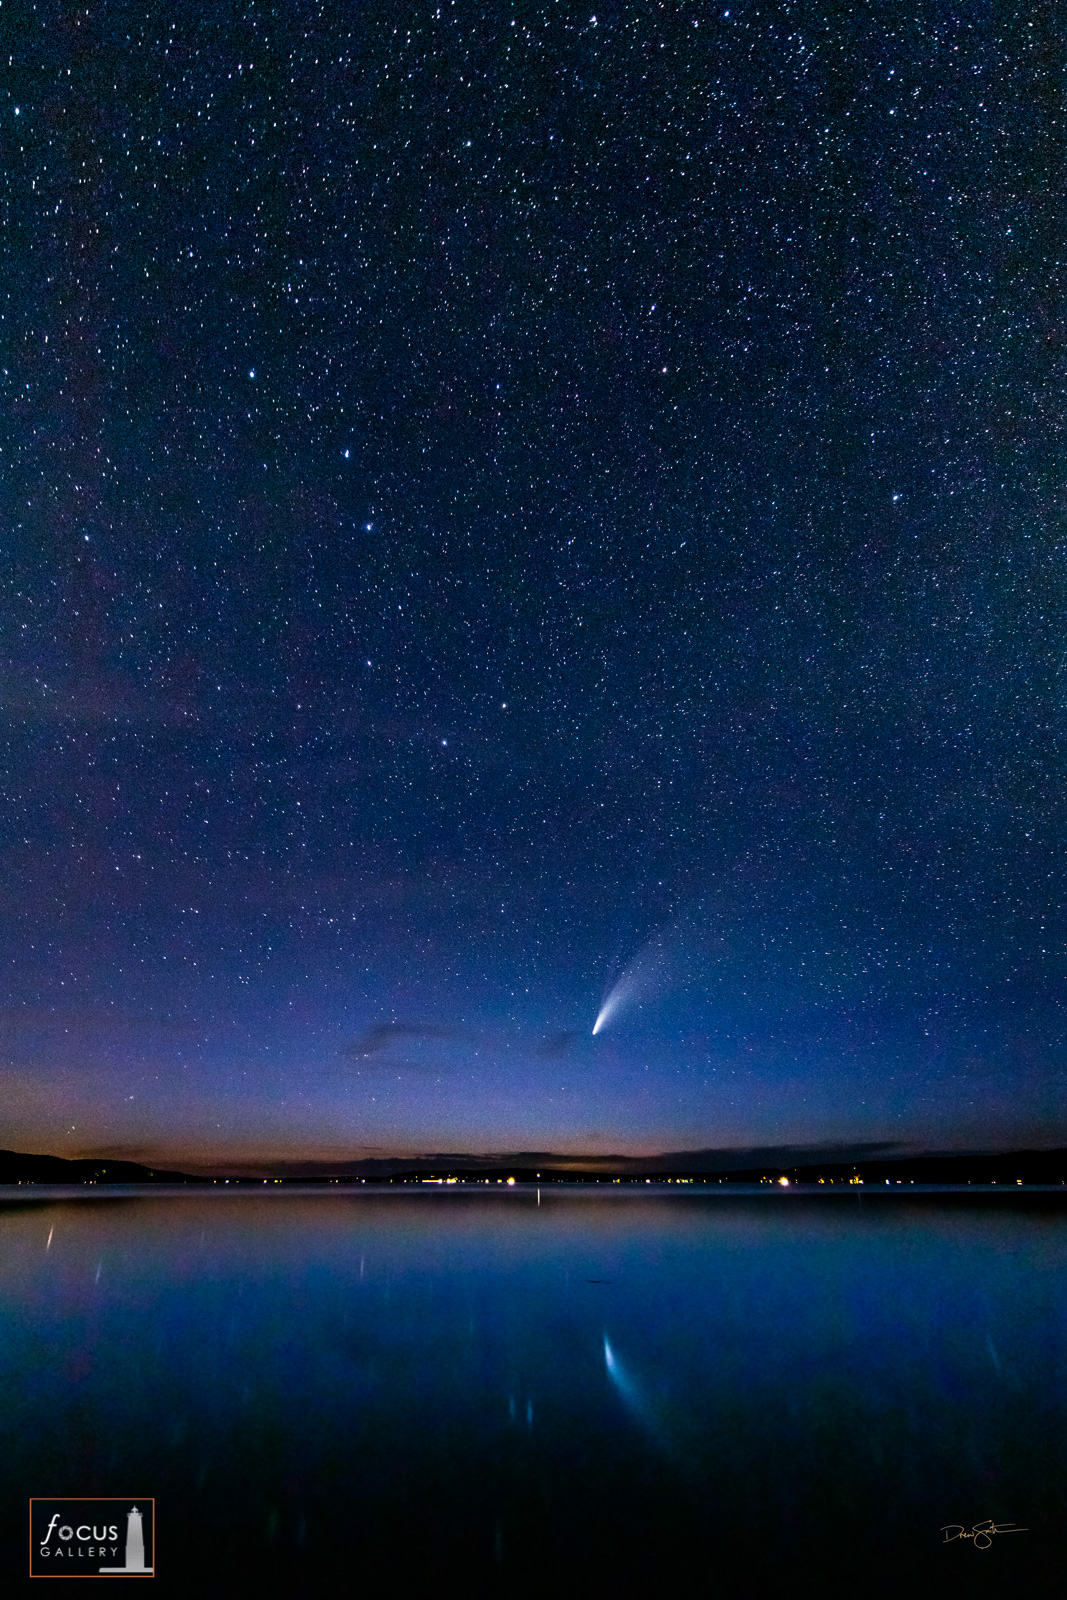 Comet NEOWISE with the Big Dipper and lots of stars in the night sky over Crystal Lake, Michigan.